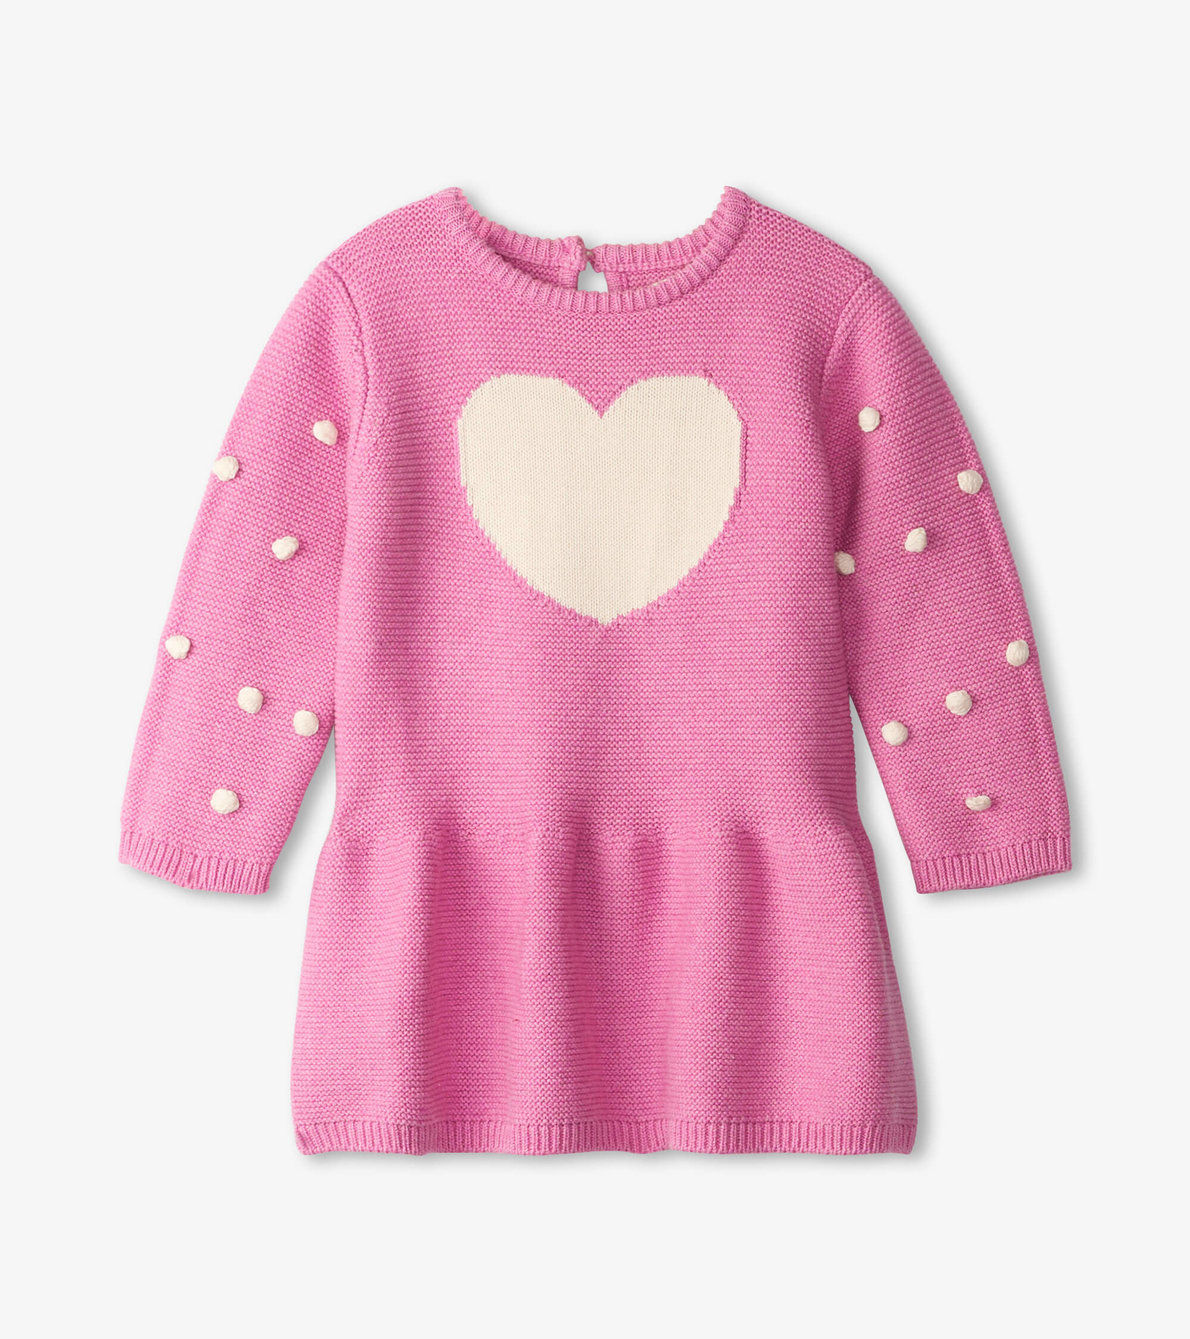 View larger image of Lovely Heart Baby Sweater Dress